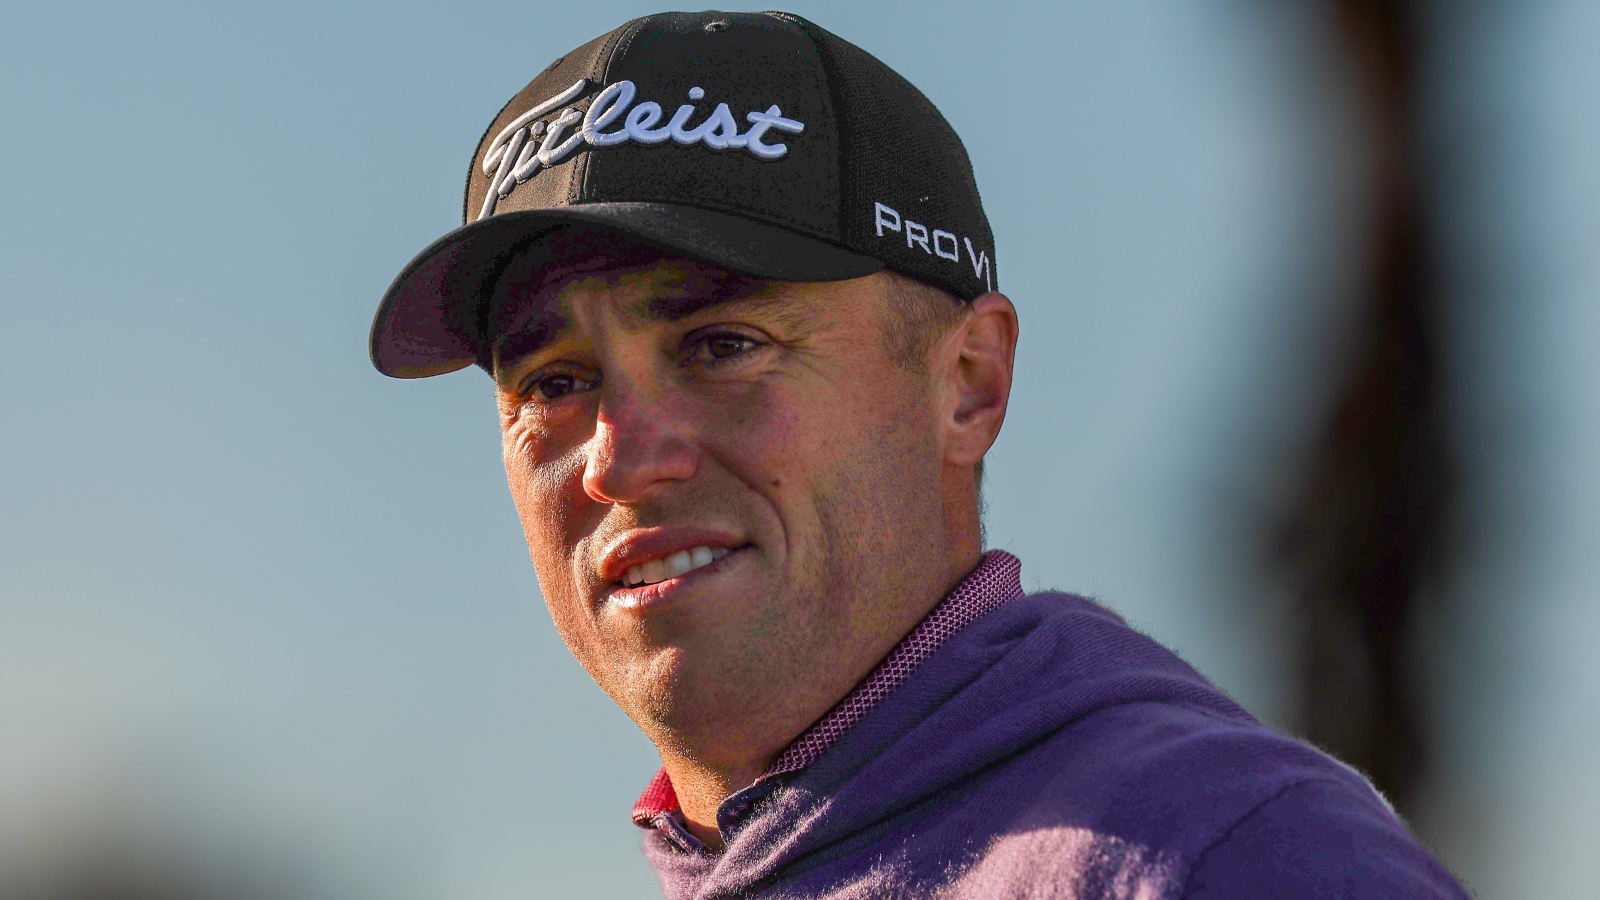 Justin Thomas at the Waste Management Open